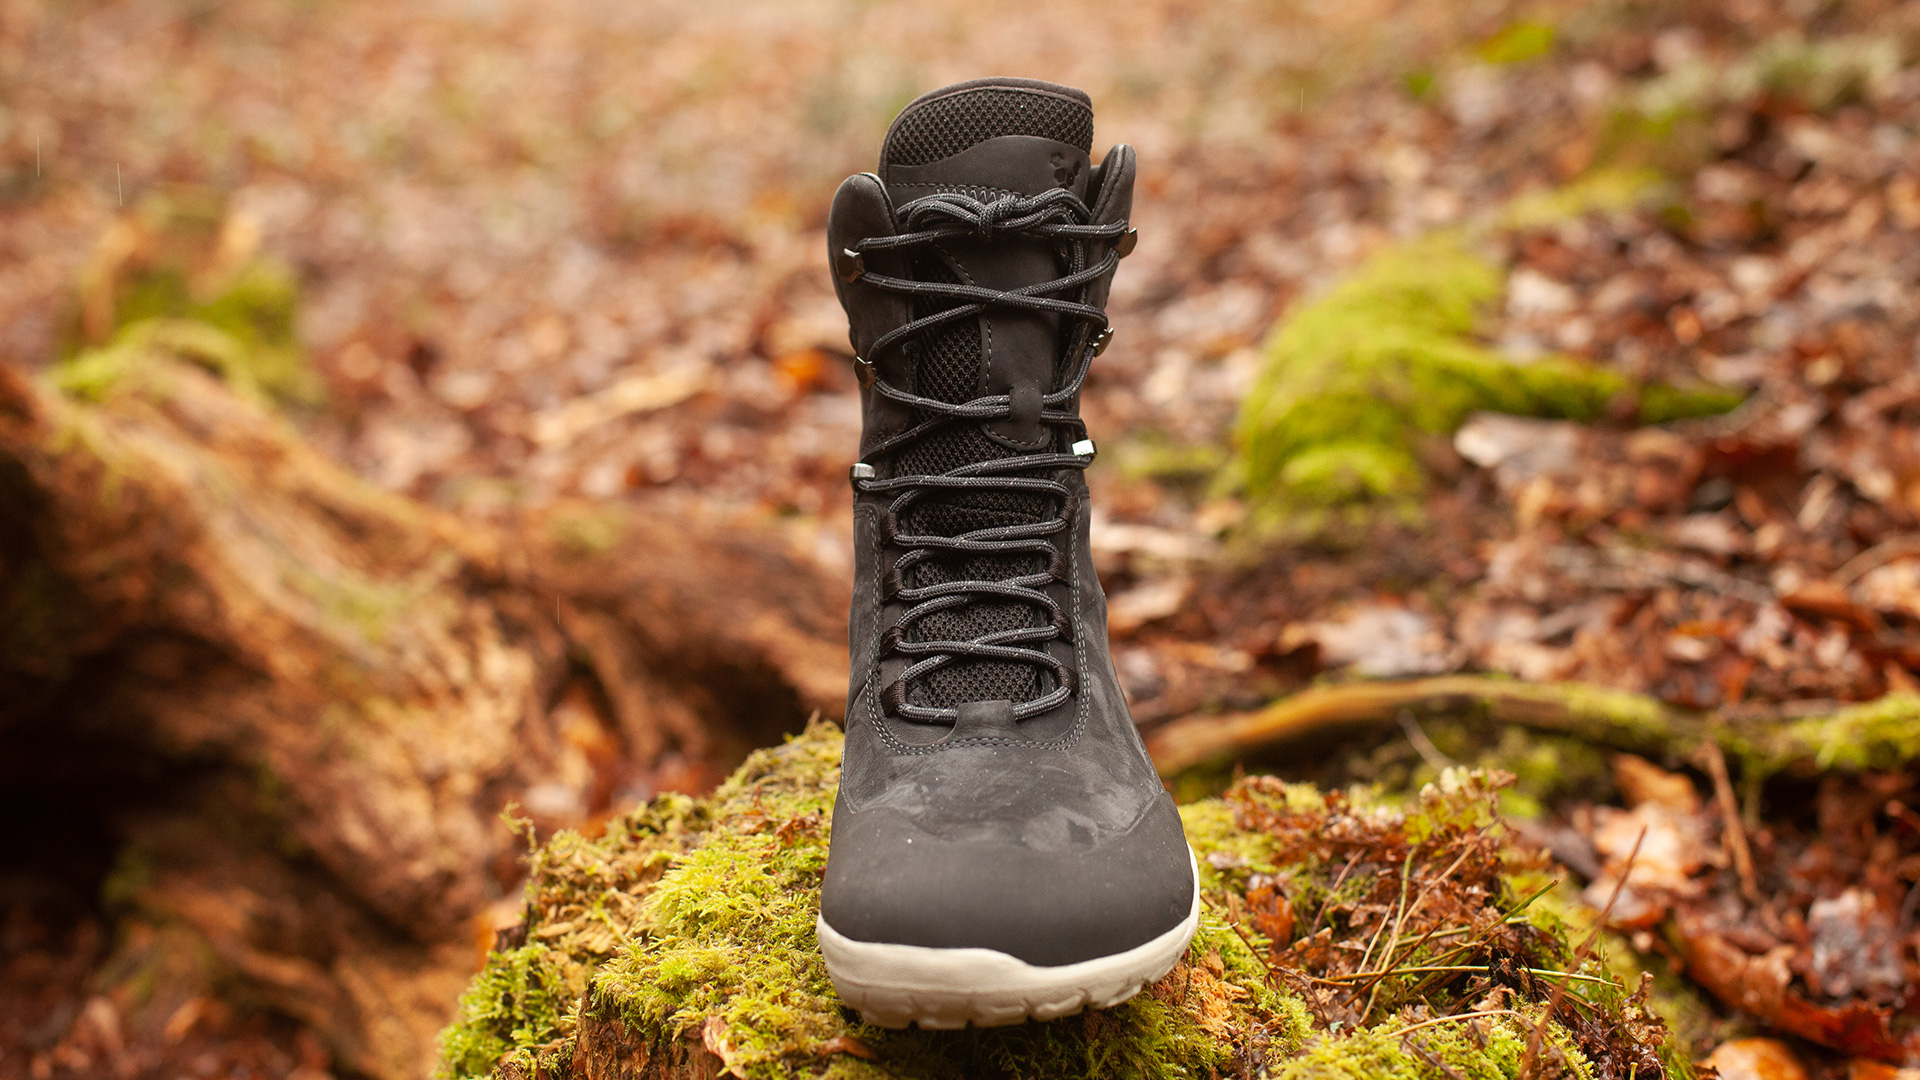 Vivobarefoot Tracker II hiking boot review: light and freeing barefoot ...